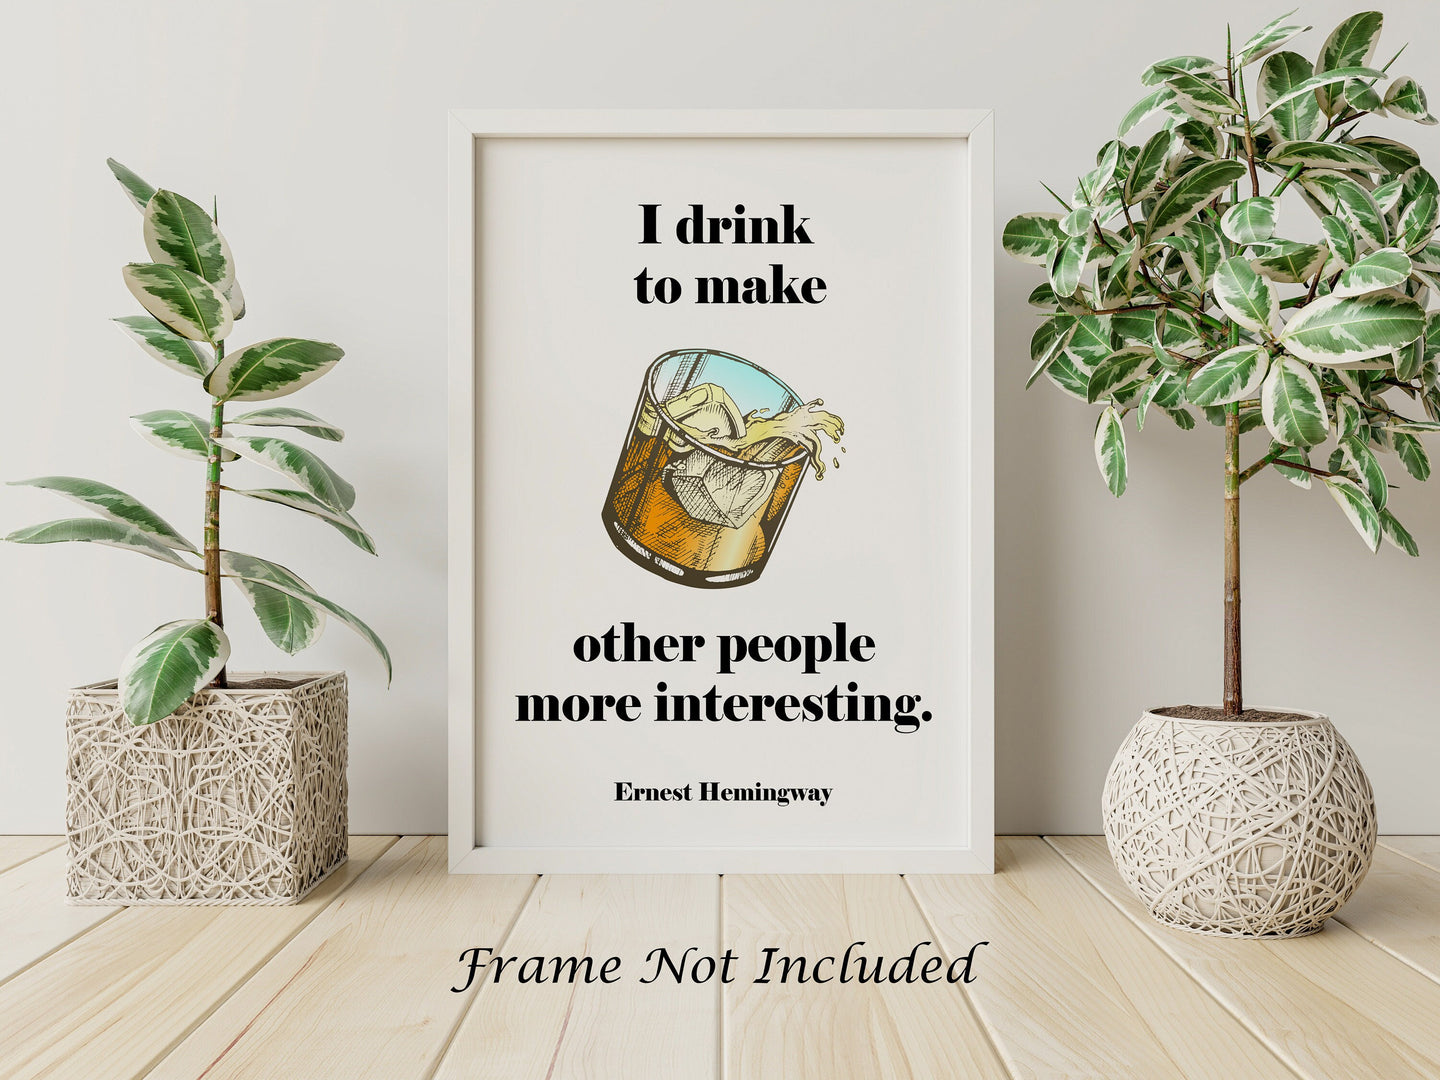 Ernest Hemingway Quote - I drink to make other people more interesting - Gifts for him Christmas whiskey